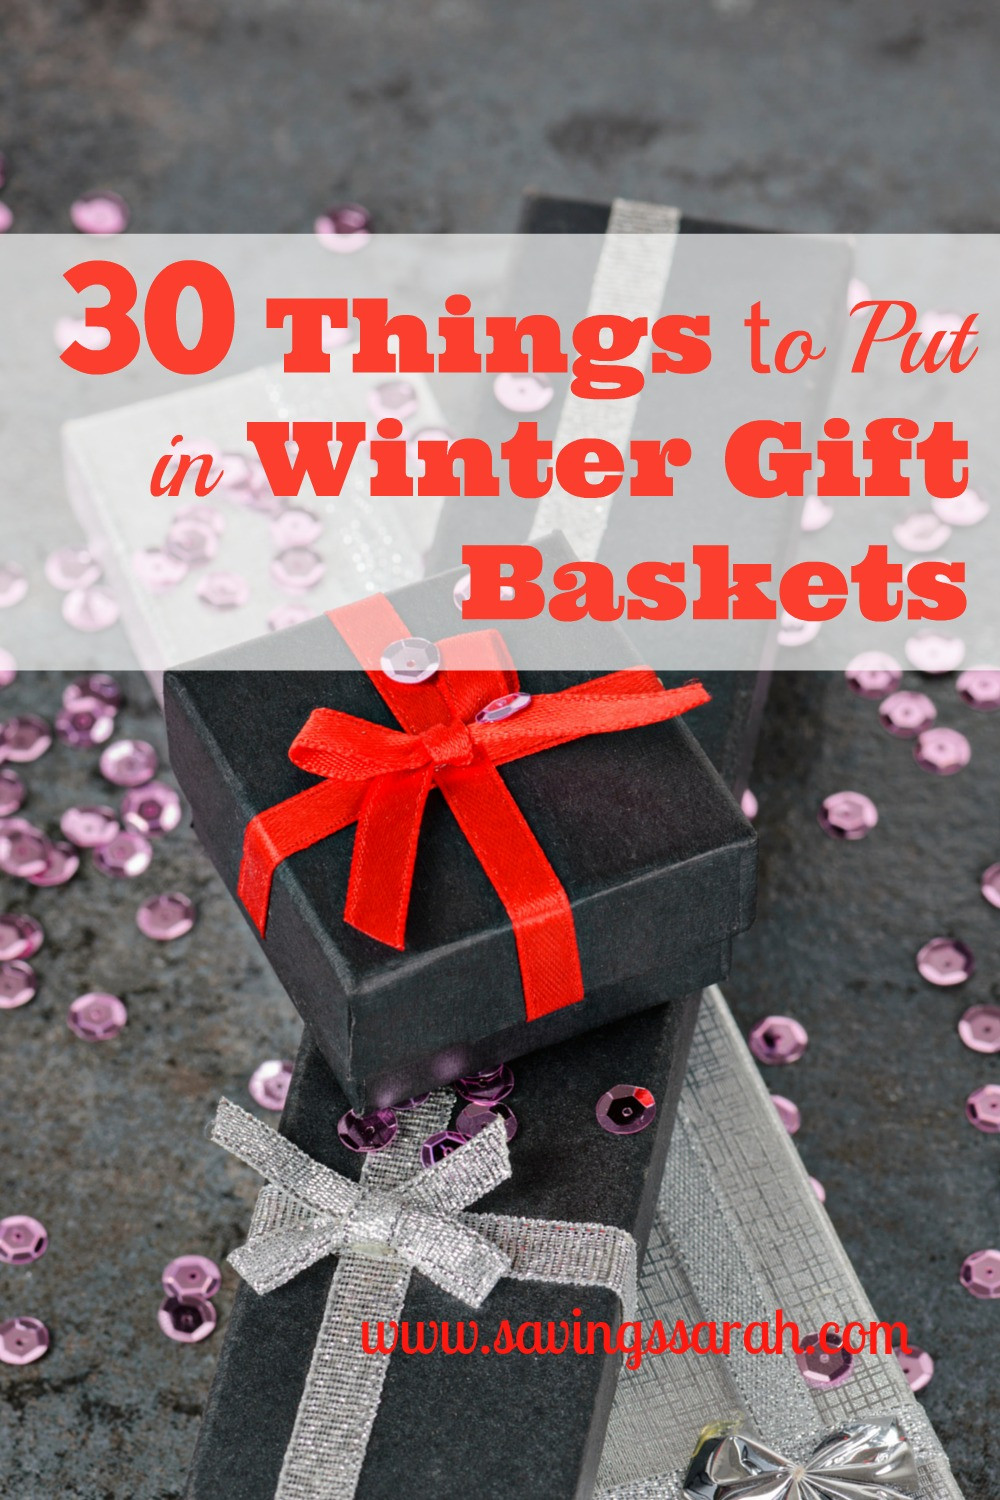 Winter Gift Basket Ideas
 30 Things to Put In Winter Gift Baskets Earning and